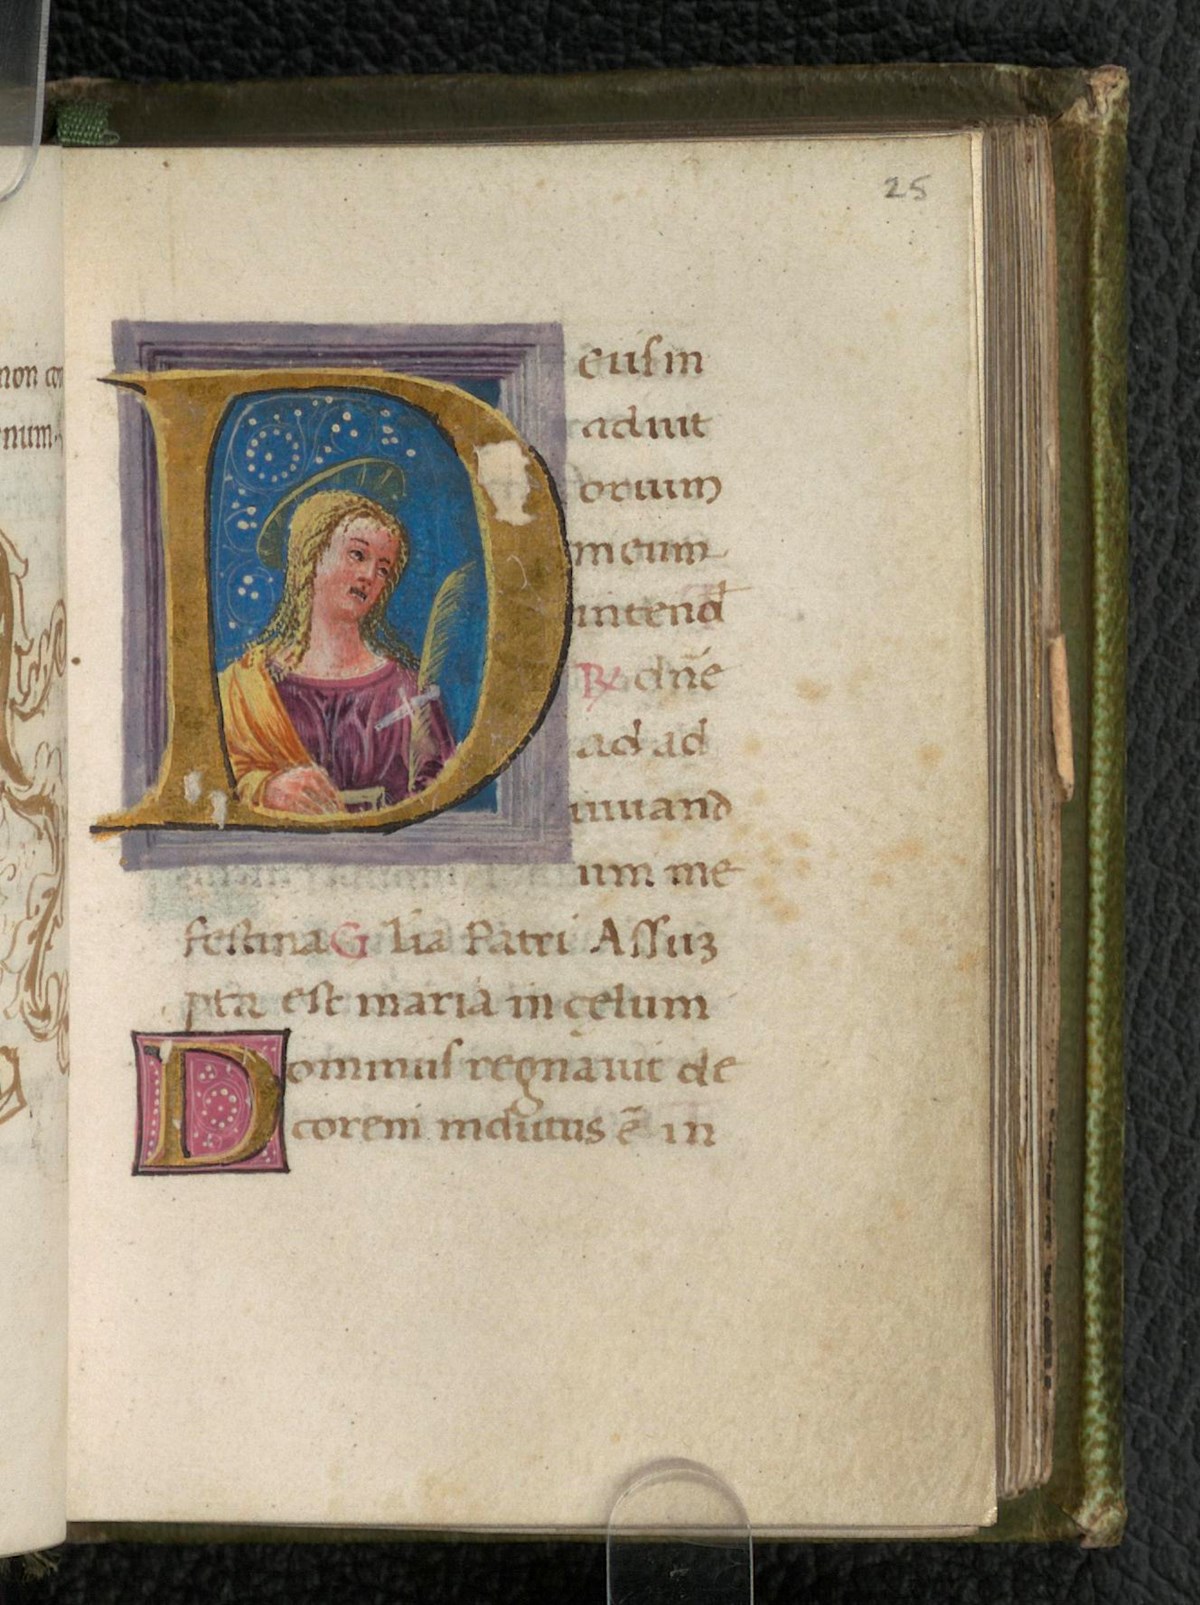 The National Library's collection of Italian manuscripts includes some very fine examples. This tiny portable 15th-century Book of Hours is written on very fine vellum and beautifully illuminated. Pictures of saints appear in golden initials, and there are some larger illustrations.